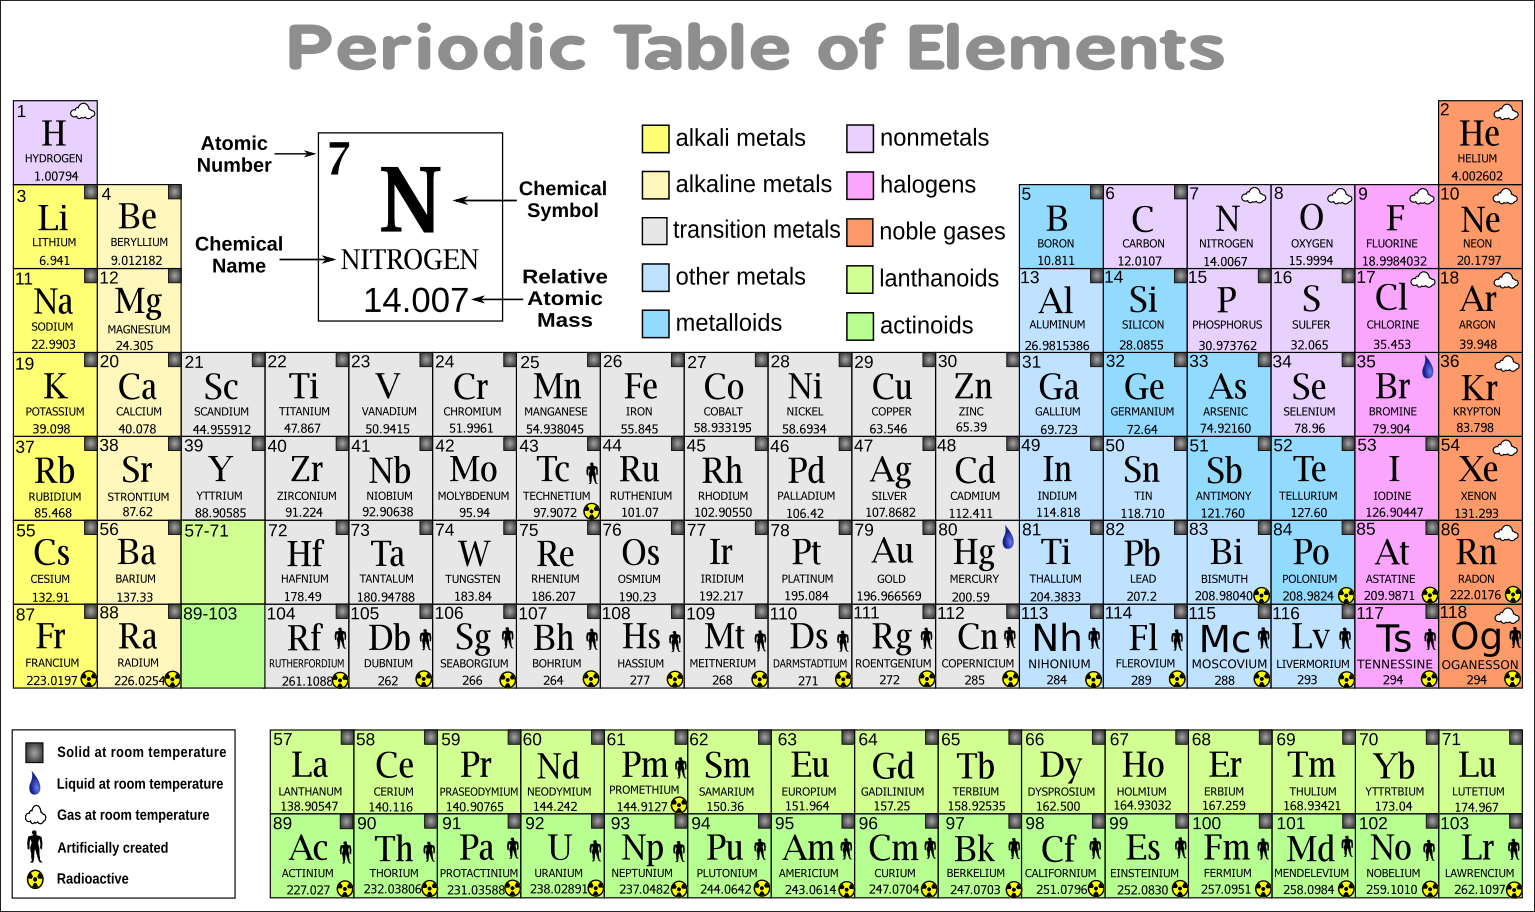 be periodic table